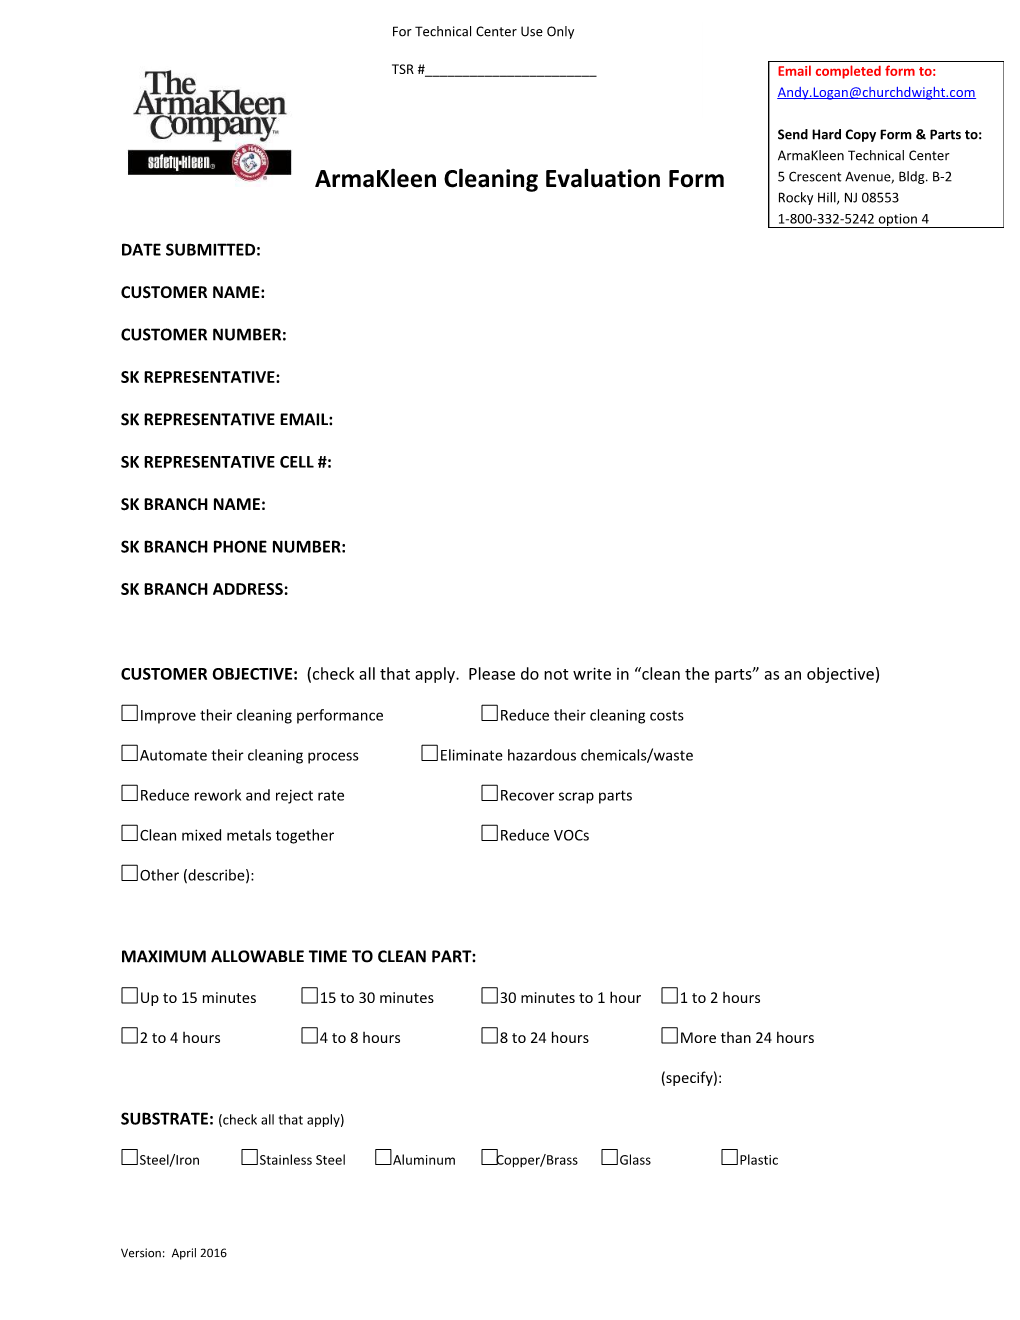 Armakleen Cleaning Evaluation Form Pg. 1